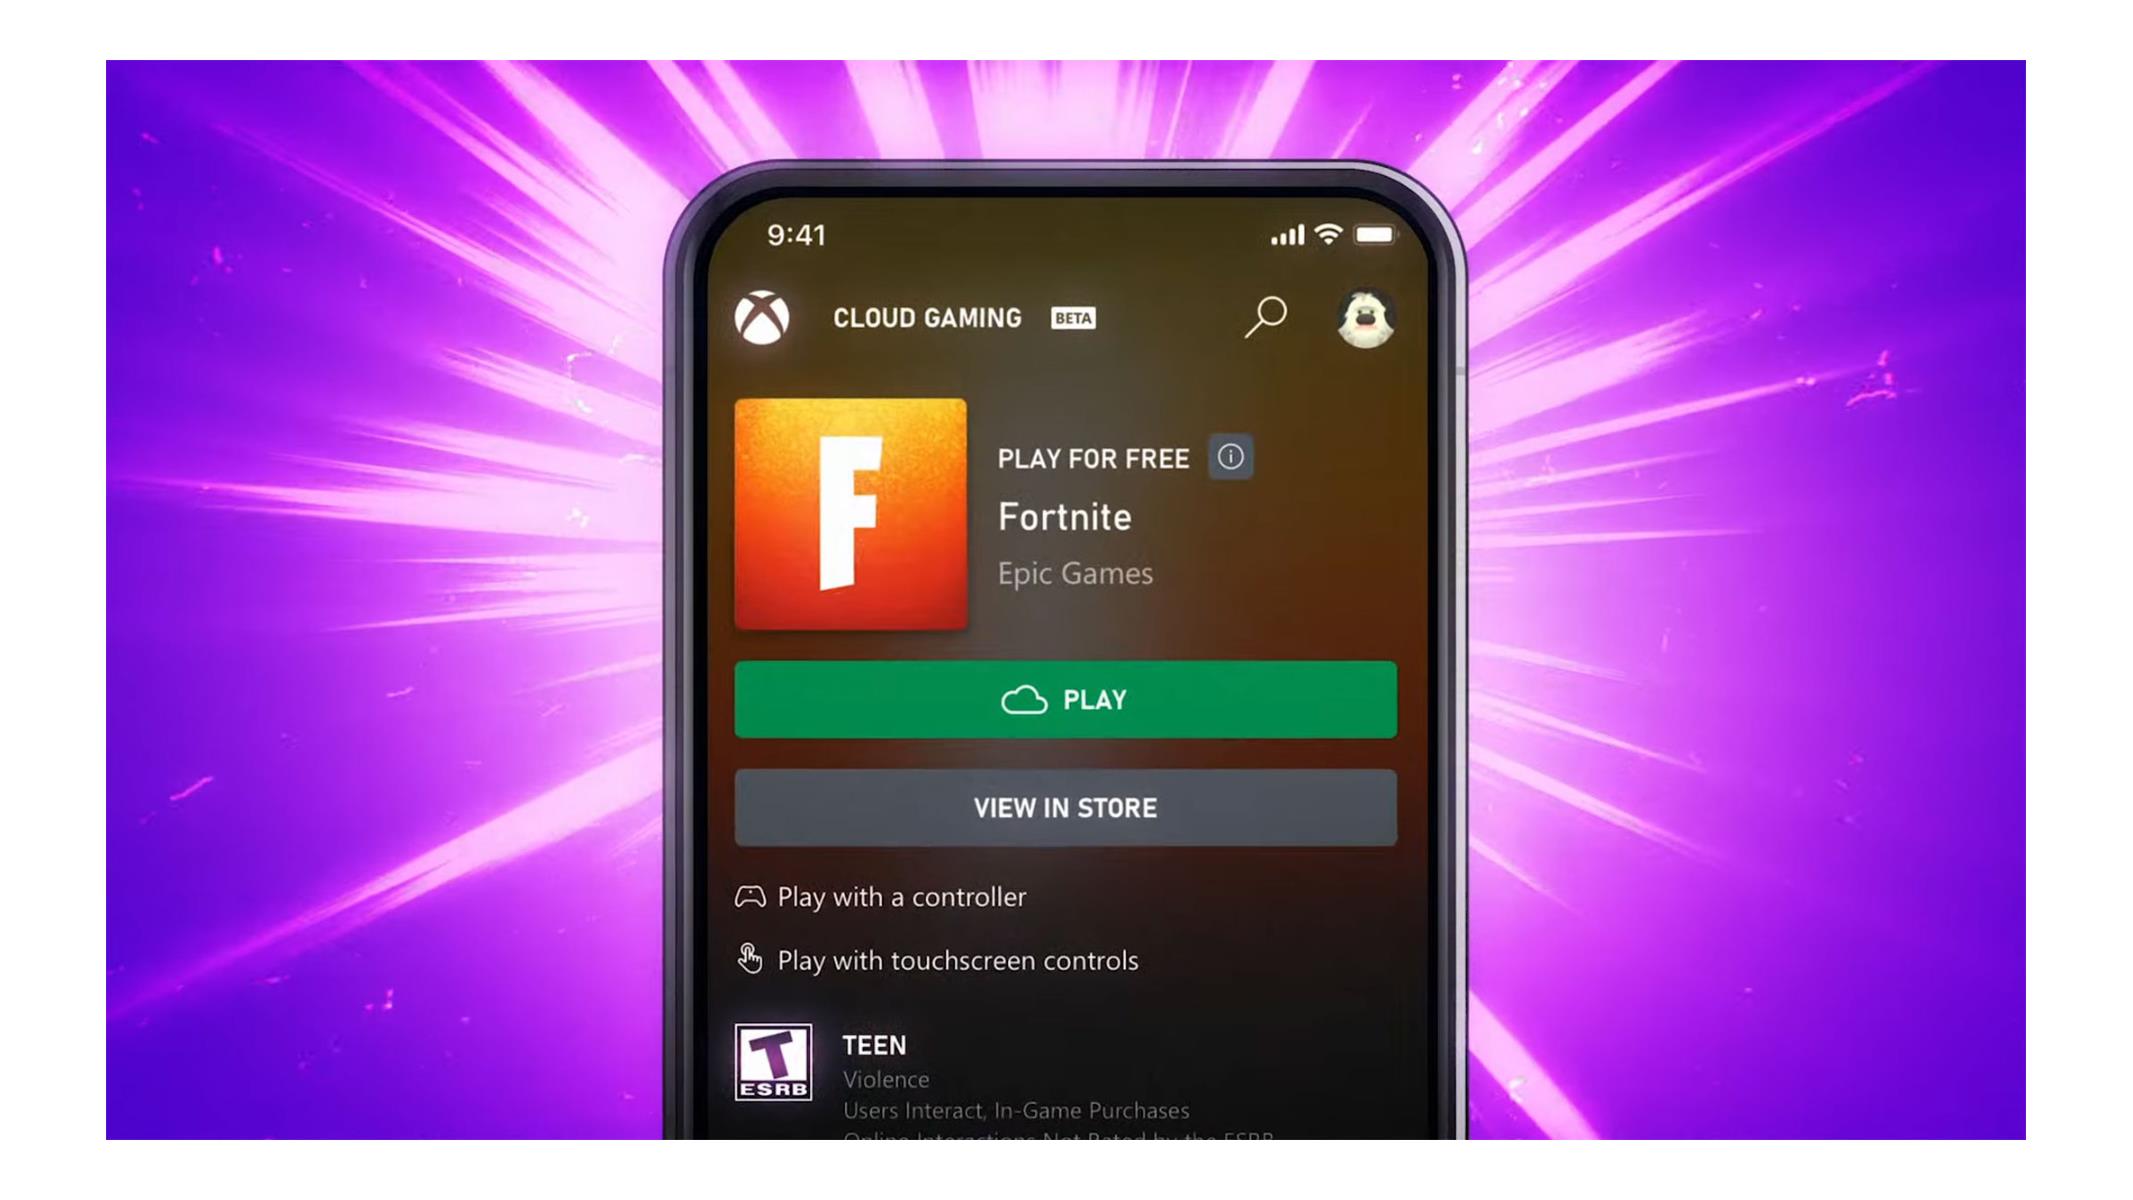 Play Fortnite For Free Again On iOS And Android Through Xbox Cloud